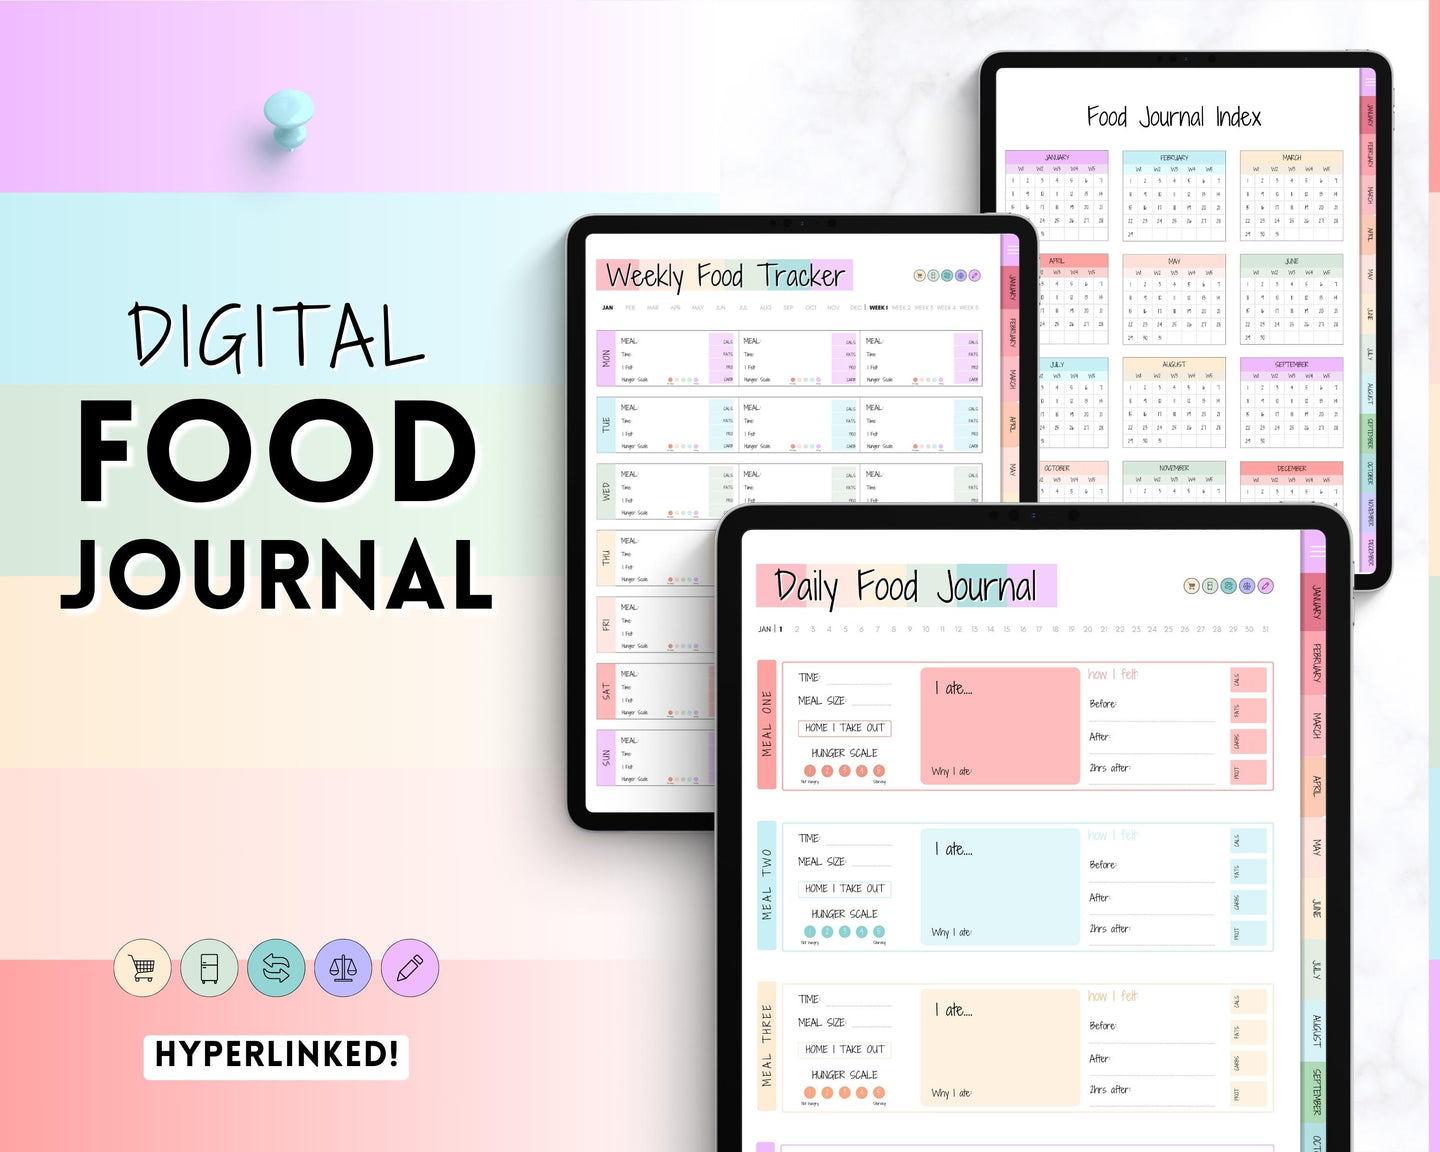 Colorful Digital Food Diary Tracker | Food Journal & Weekly Meal Planner | For Daily Food Tracker, Digital Planner, Diet Journal & Fitness on GoodNotes